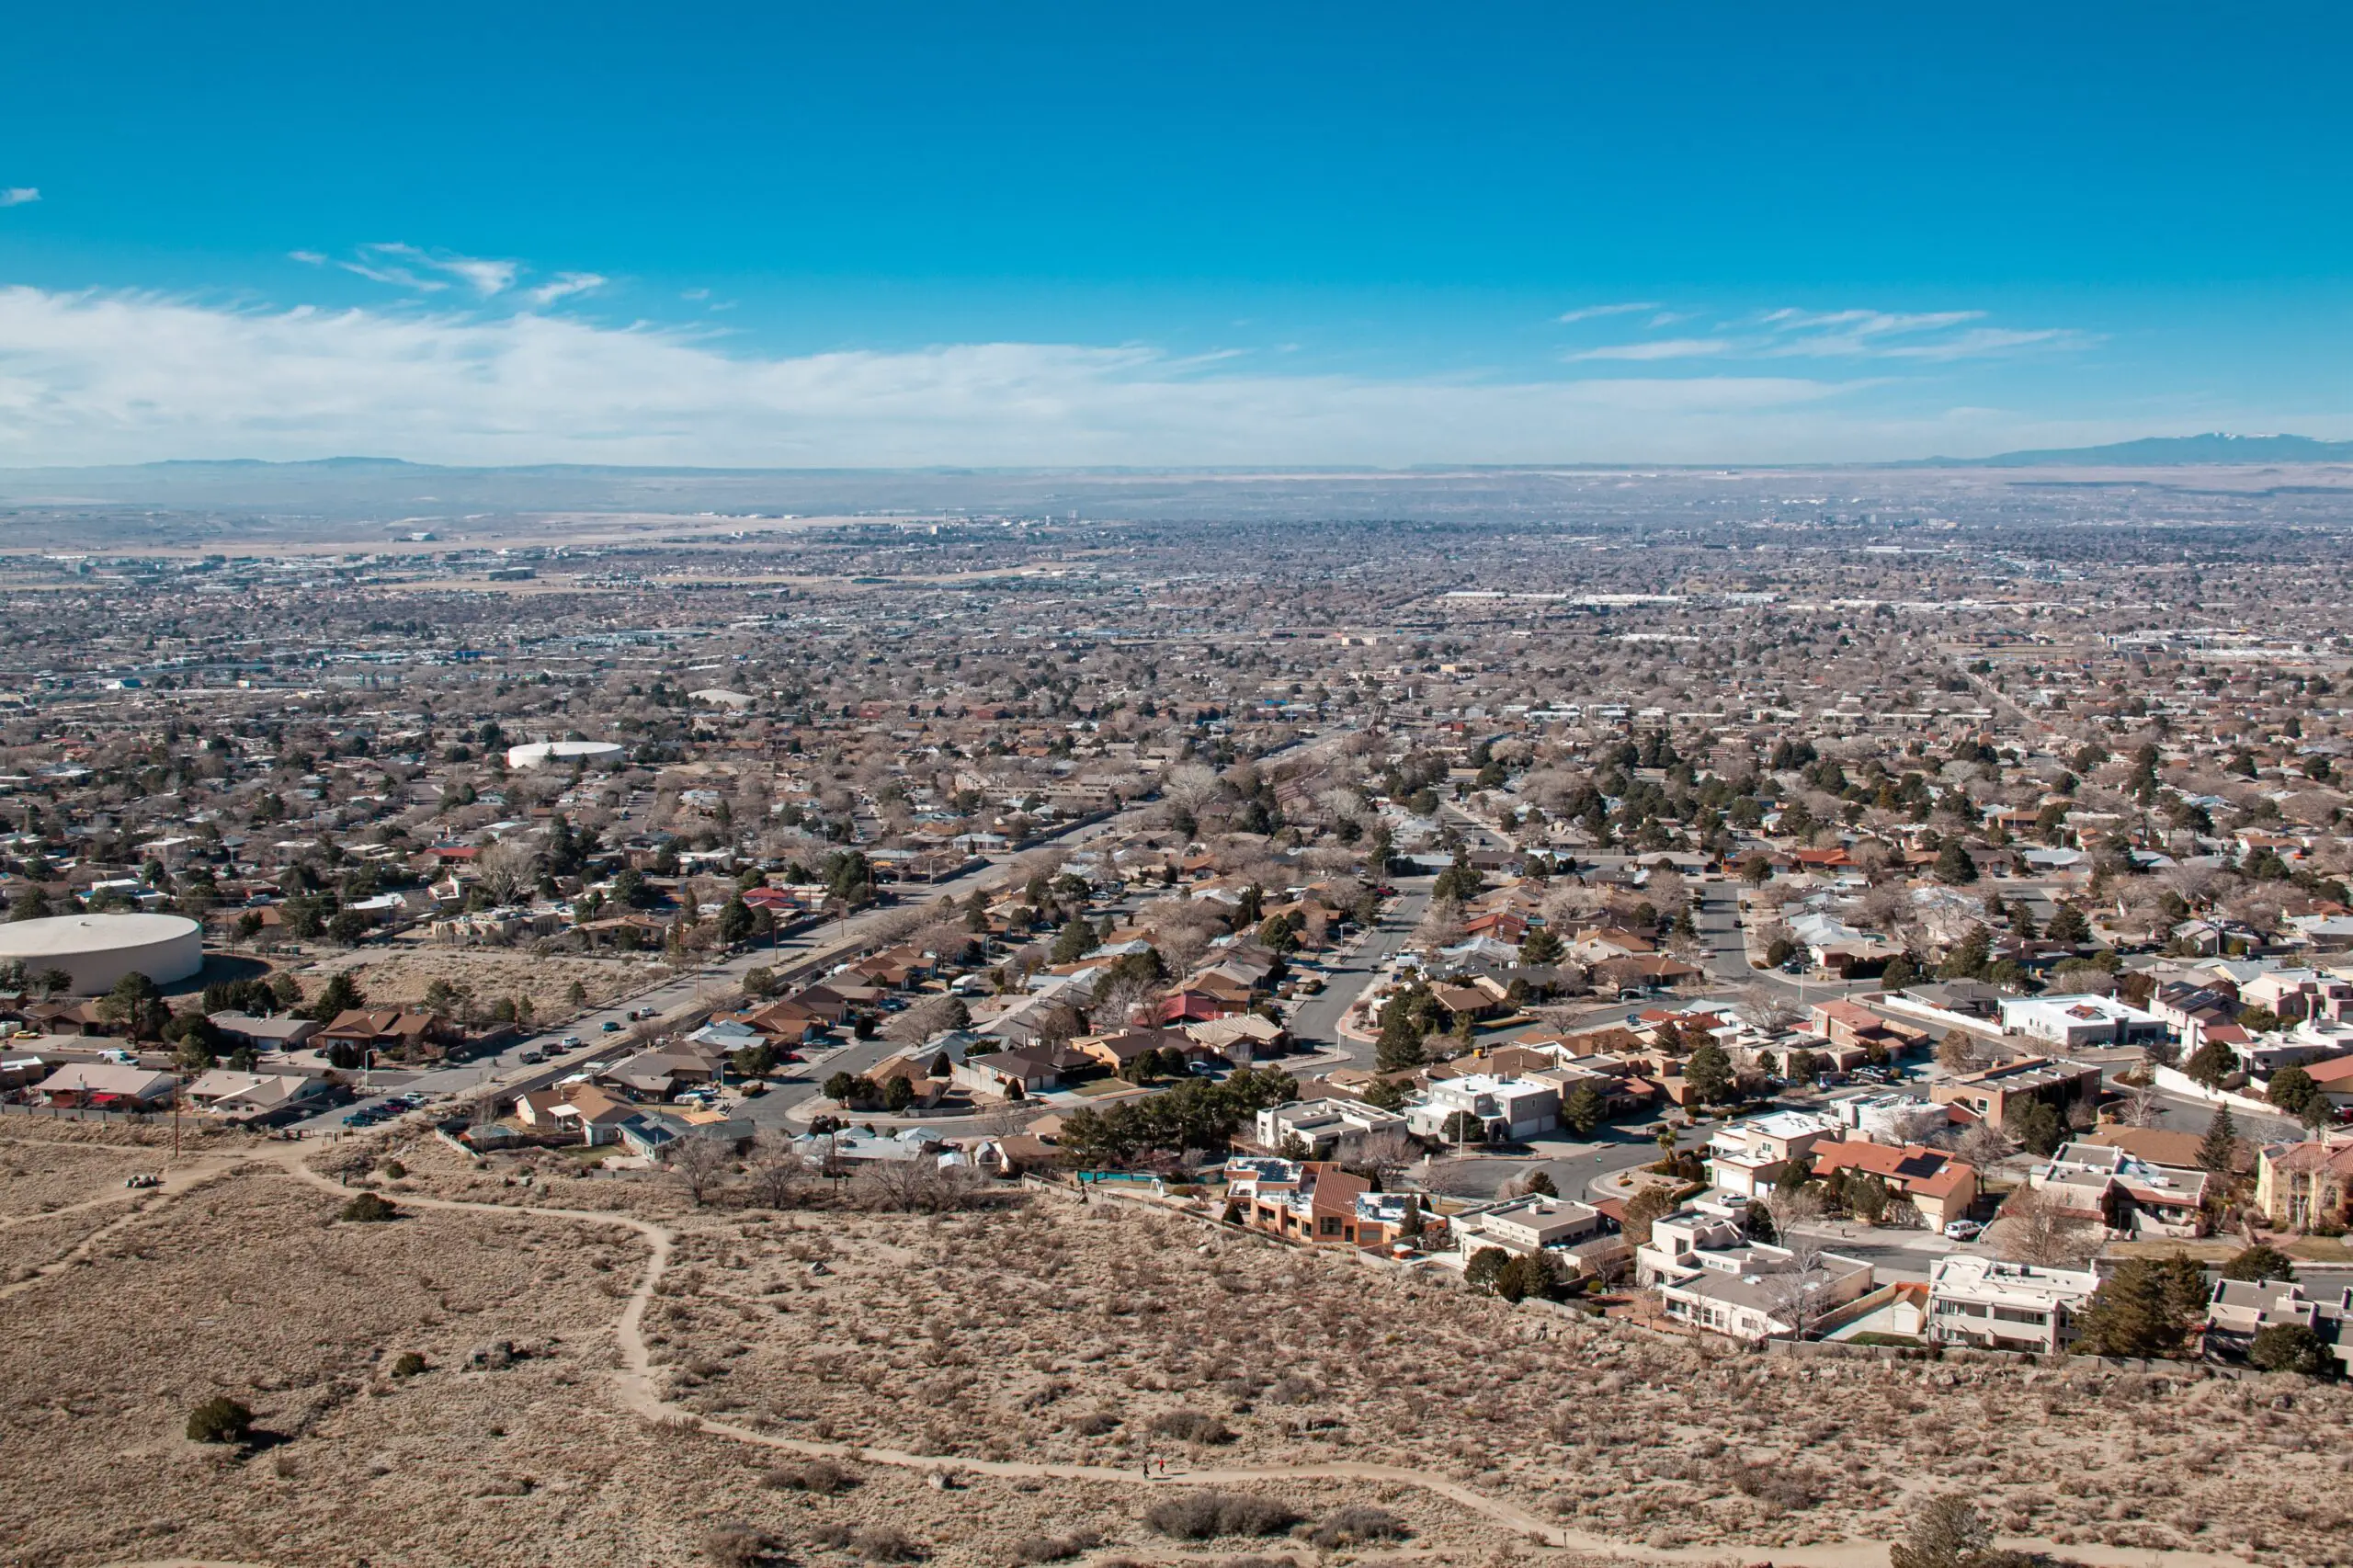 Albuquerque vs. San Bernadino - Where is the best place to live?